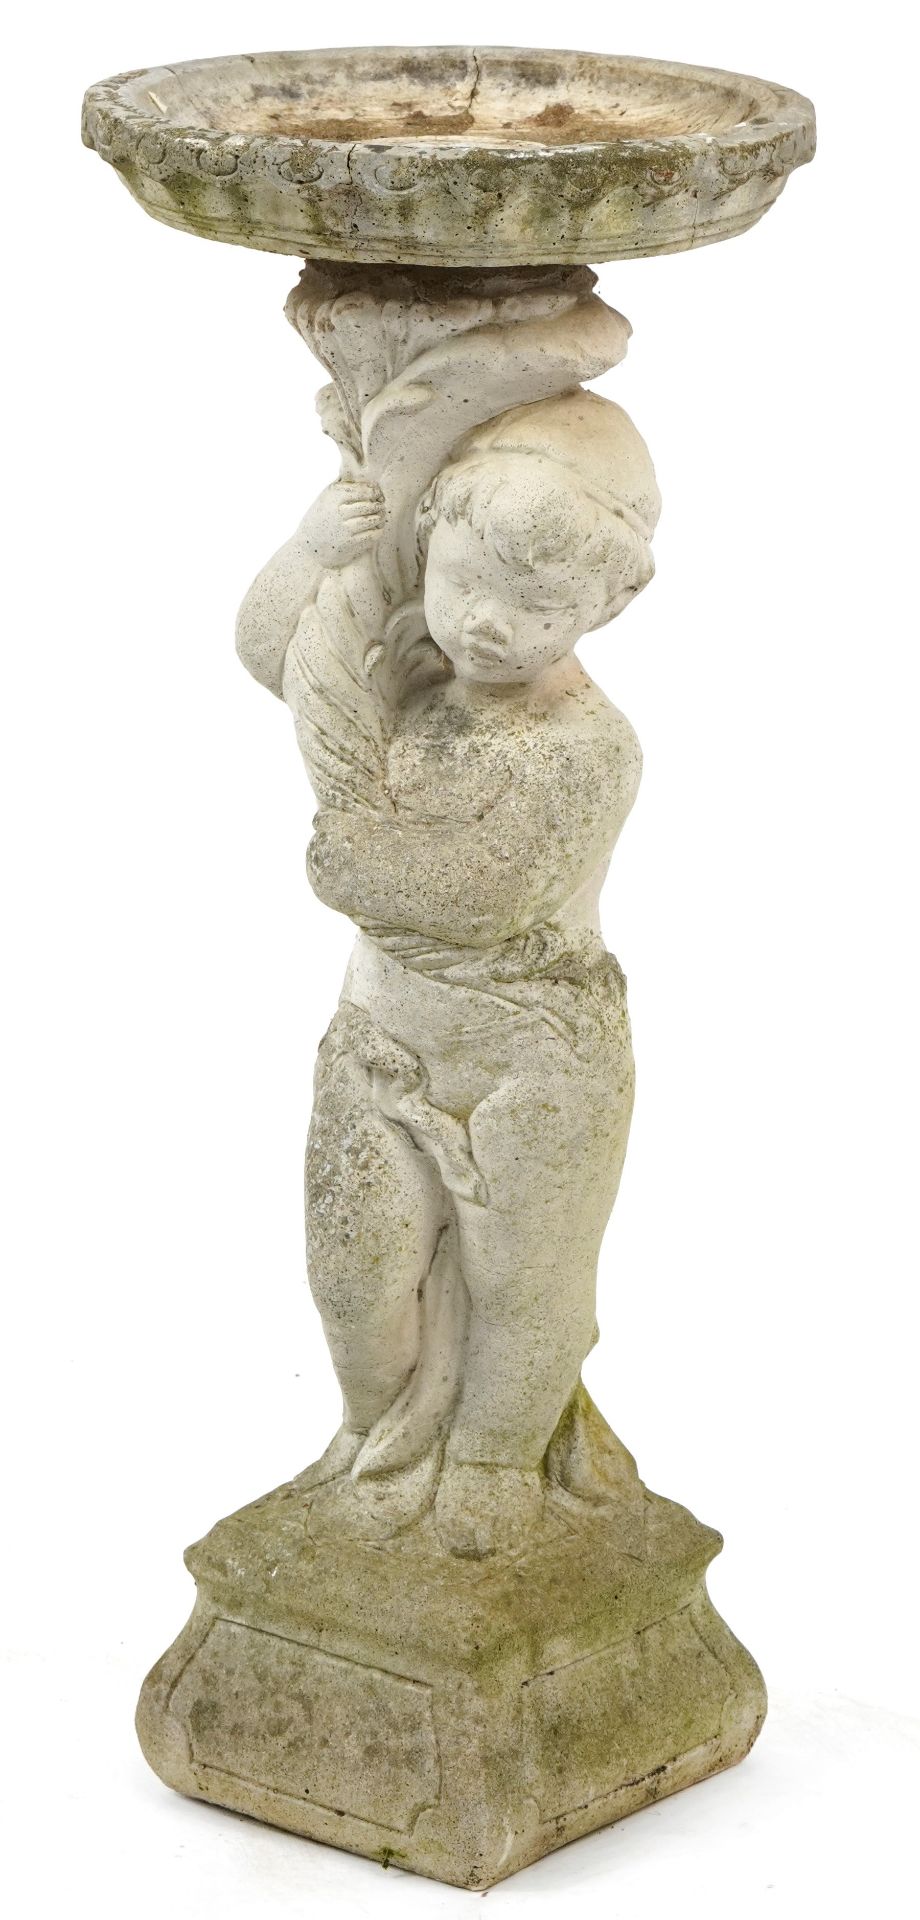 Garden stoneware bird bath in the form of a young child, 88cm high